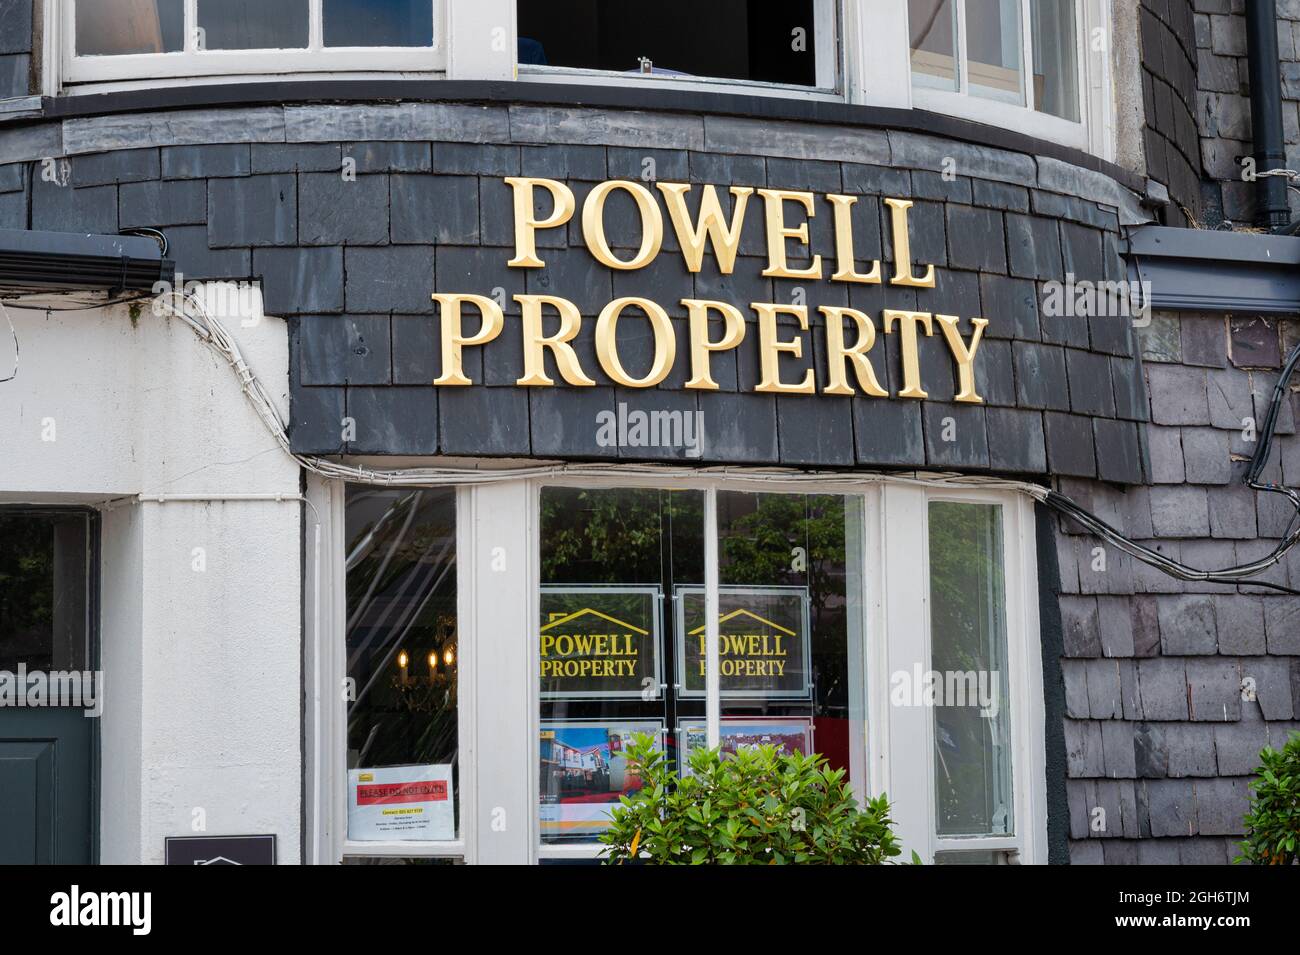 Cork, Ireland- July 14, 2021: The sign for Powell Property in Cork city Stock Photo